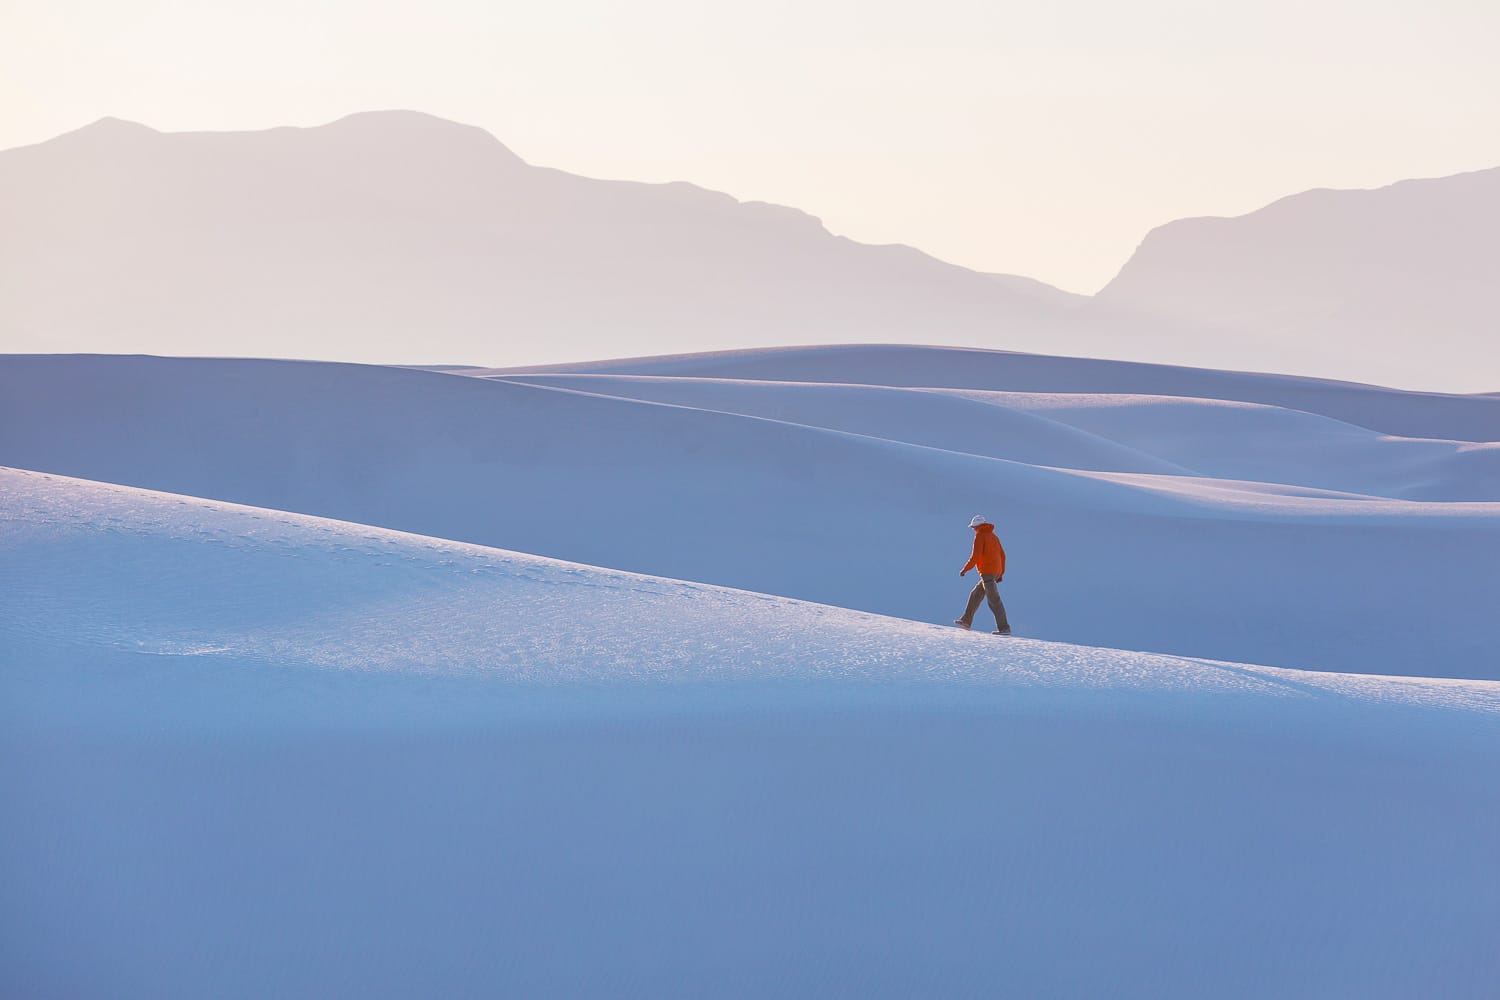 A lone hiker walks across smooth sand dunes with mountain silhouettes in the background during a hazy sunrise.